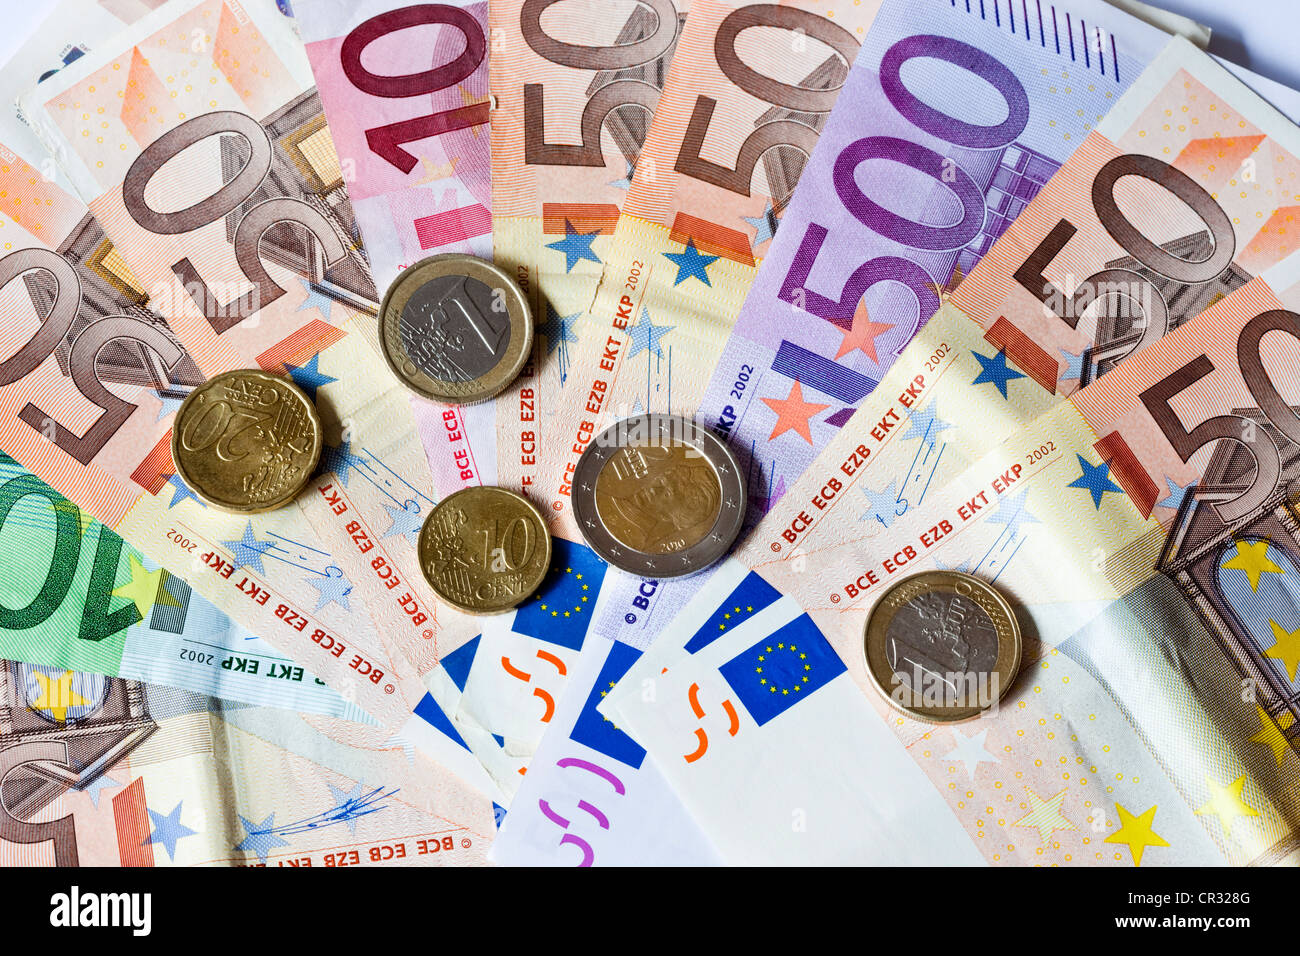 Banknotes and coins in euros Stock Photo